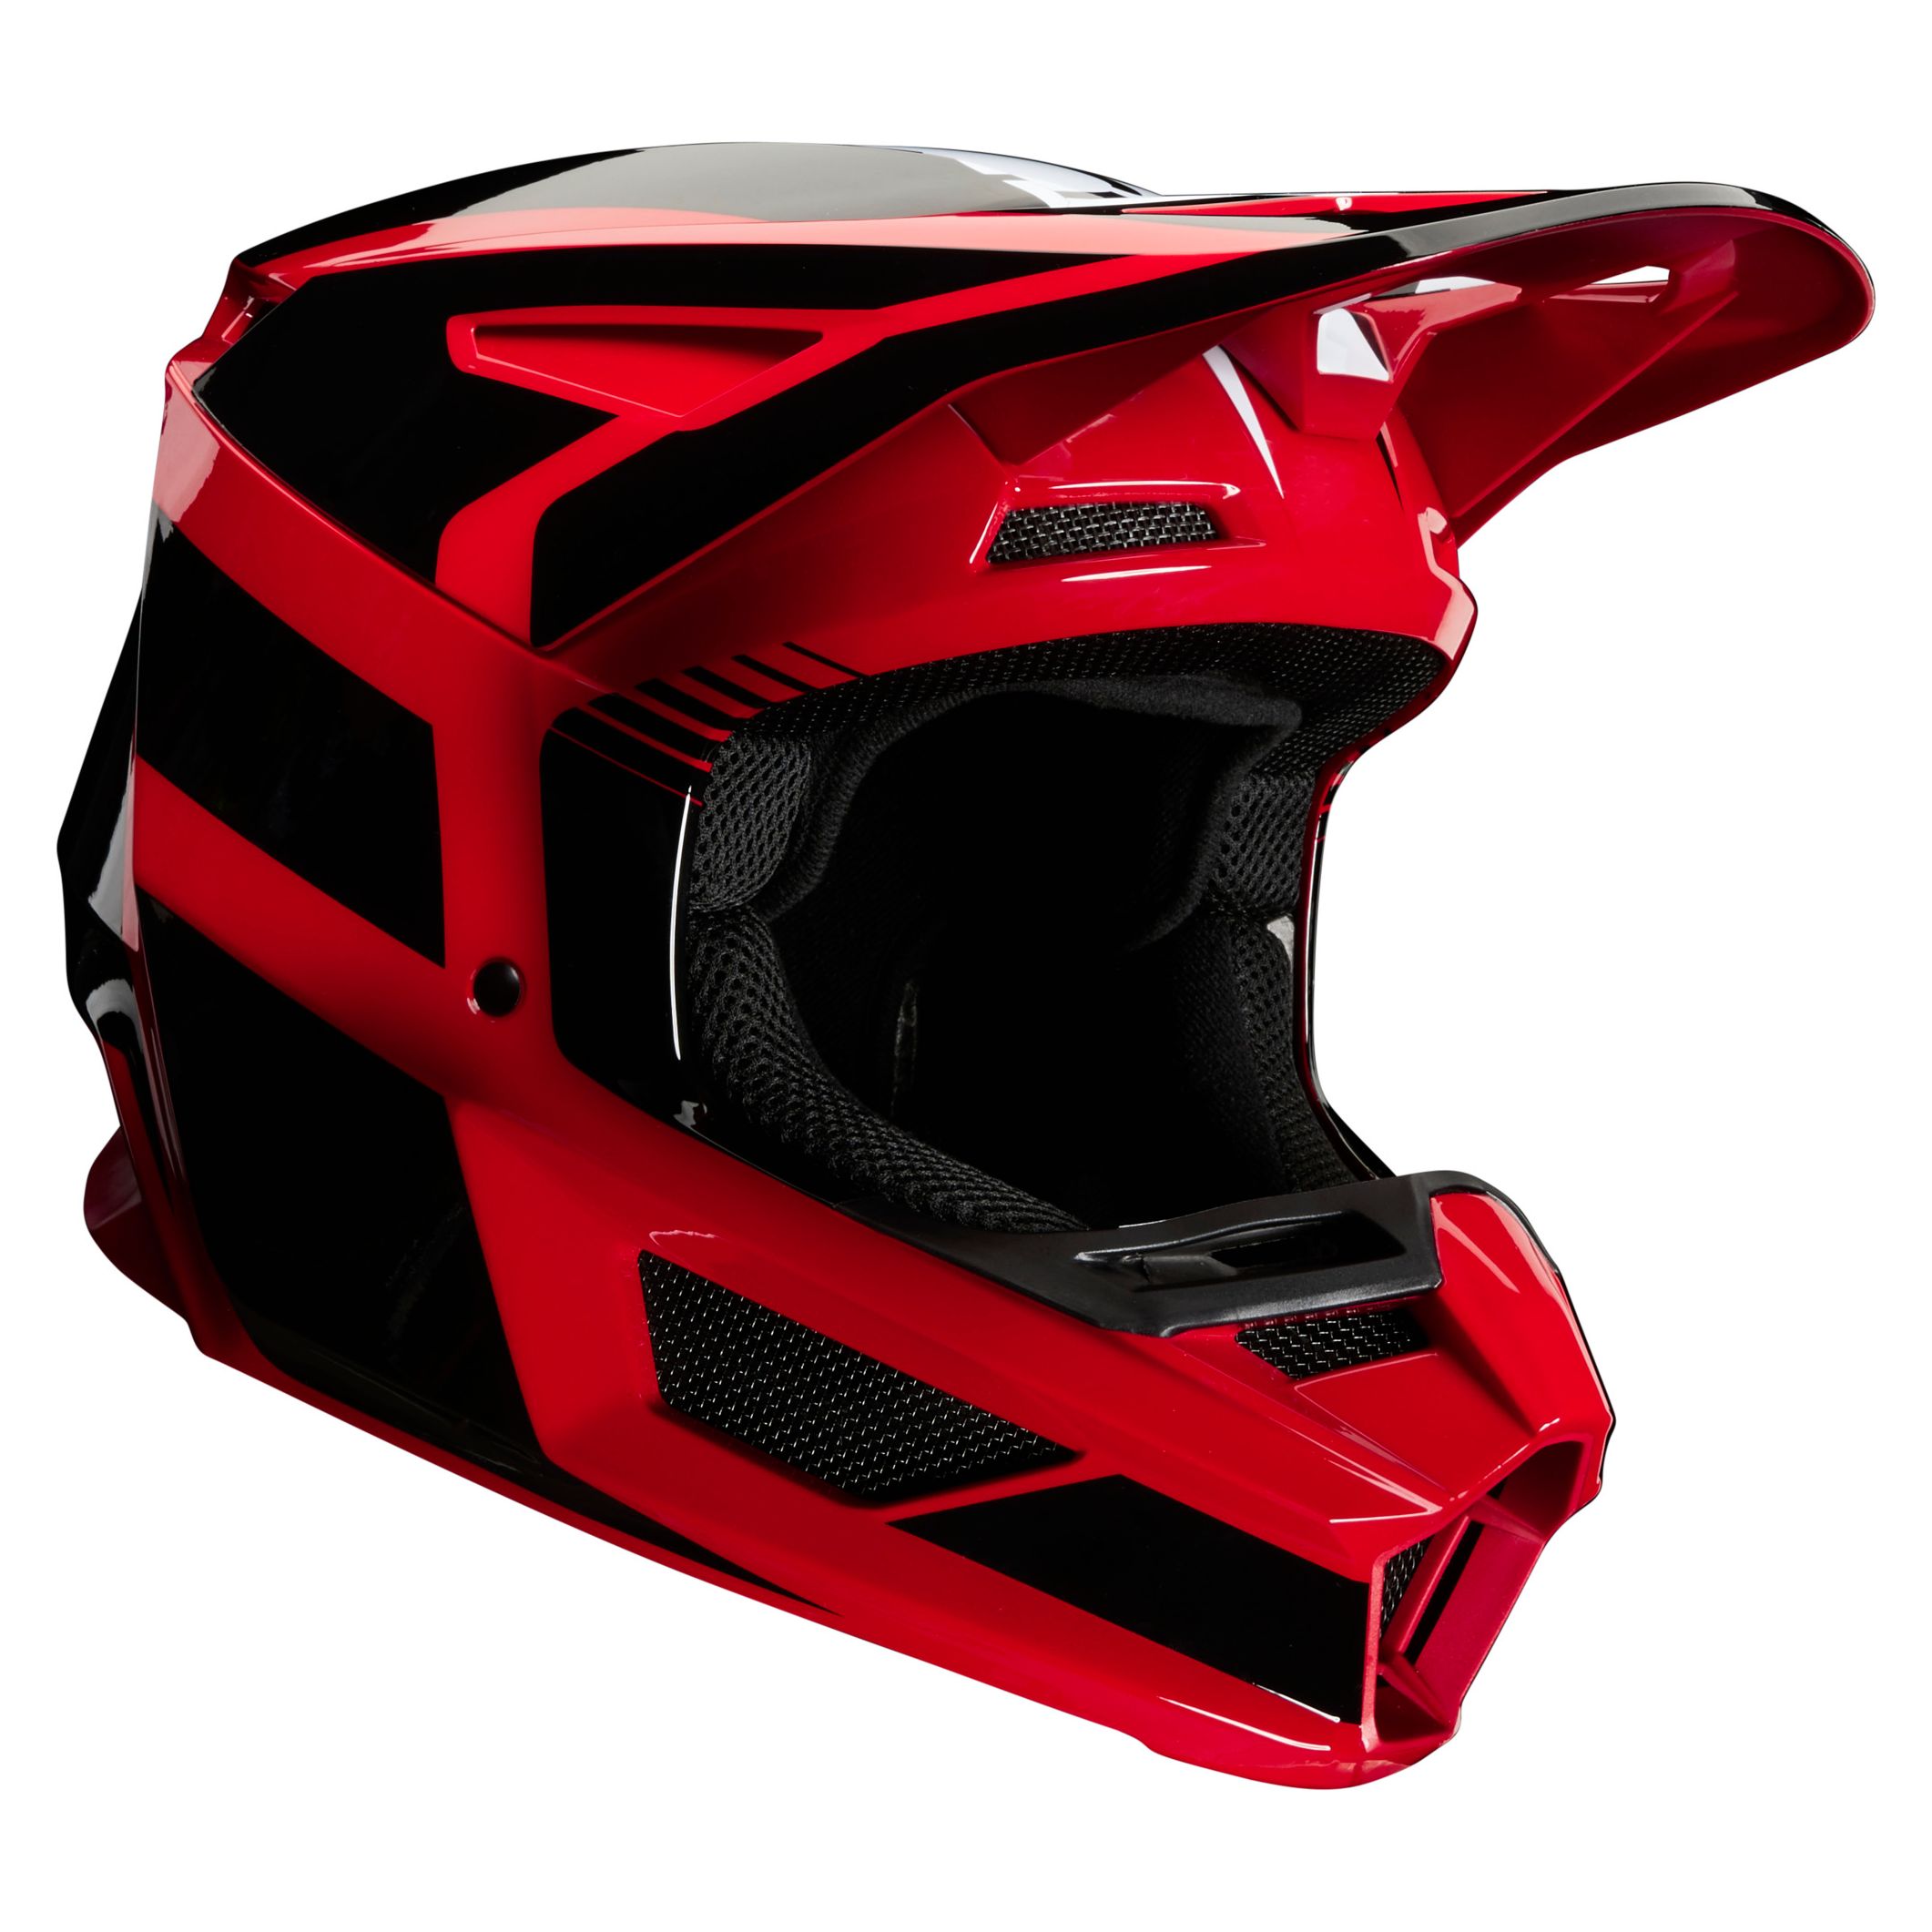 Image of Casque cross Fox YOUTH V2 - HAYL - FLAME RED